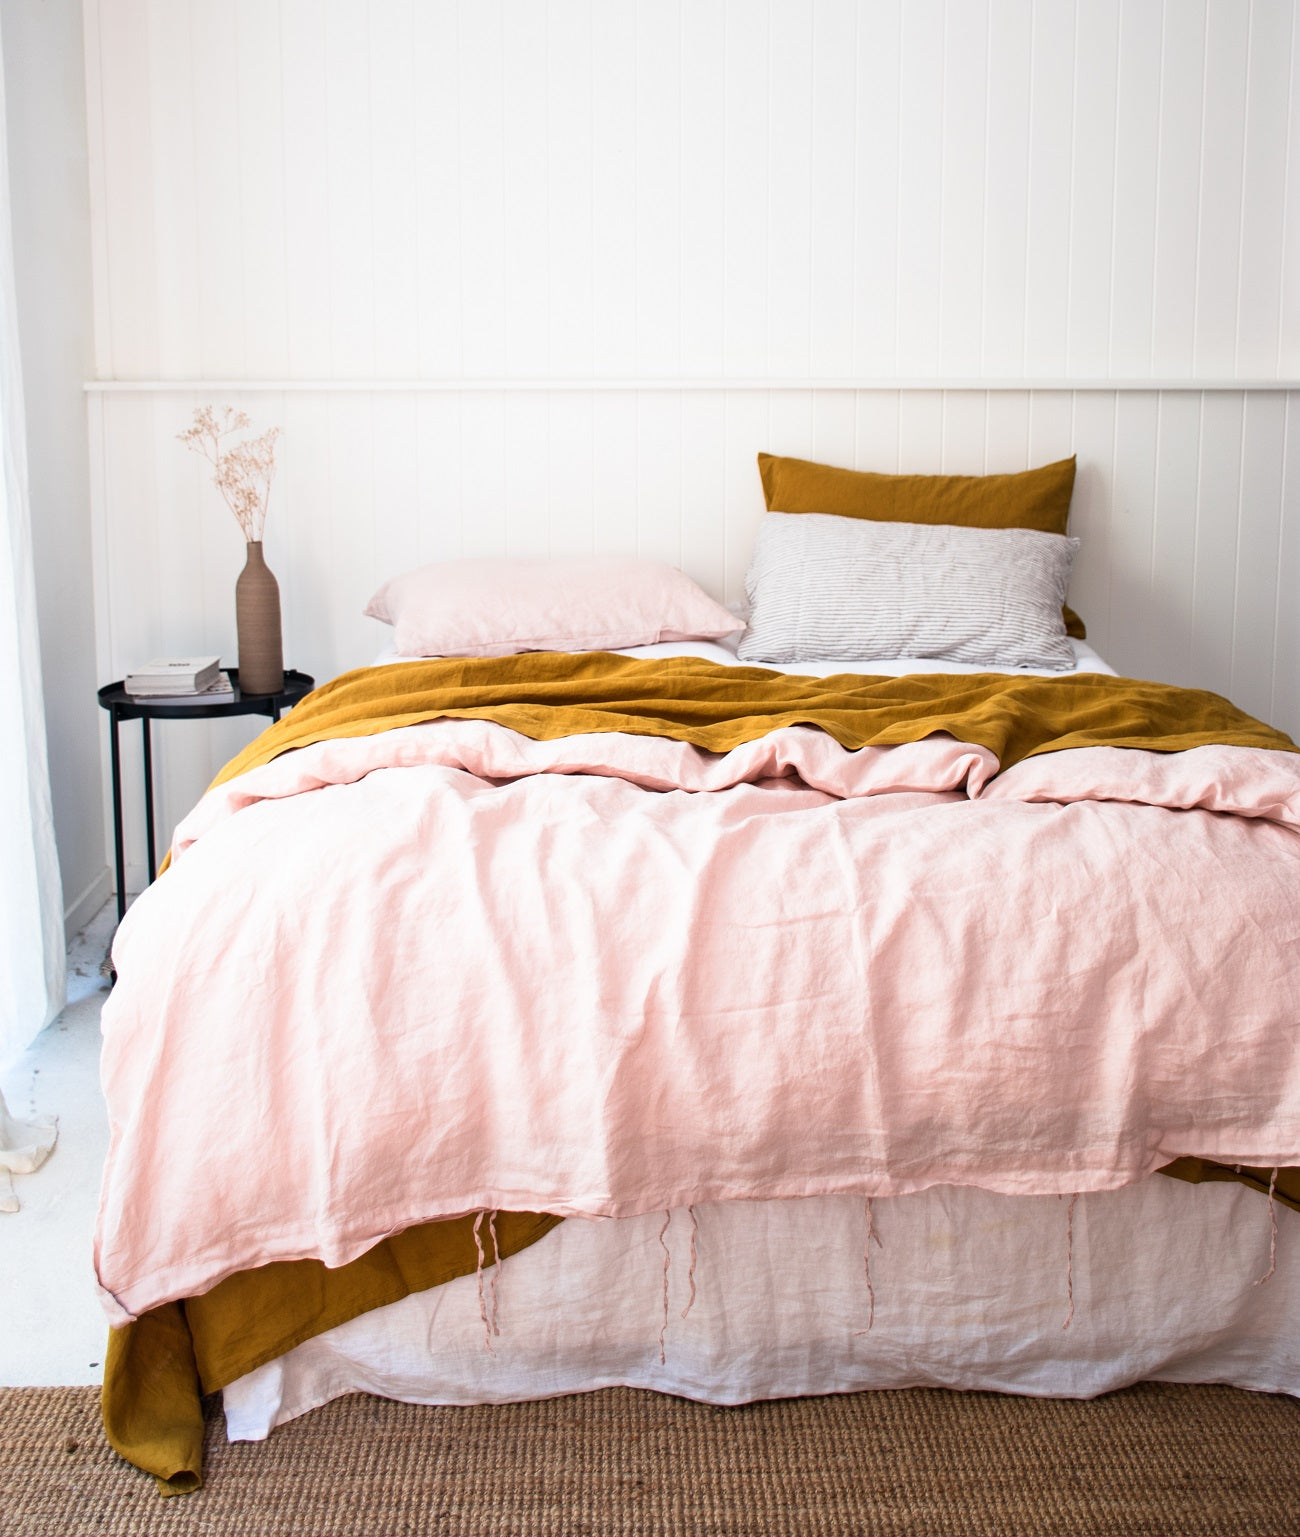 French Flax Linen Sheets in Blush and Mustard